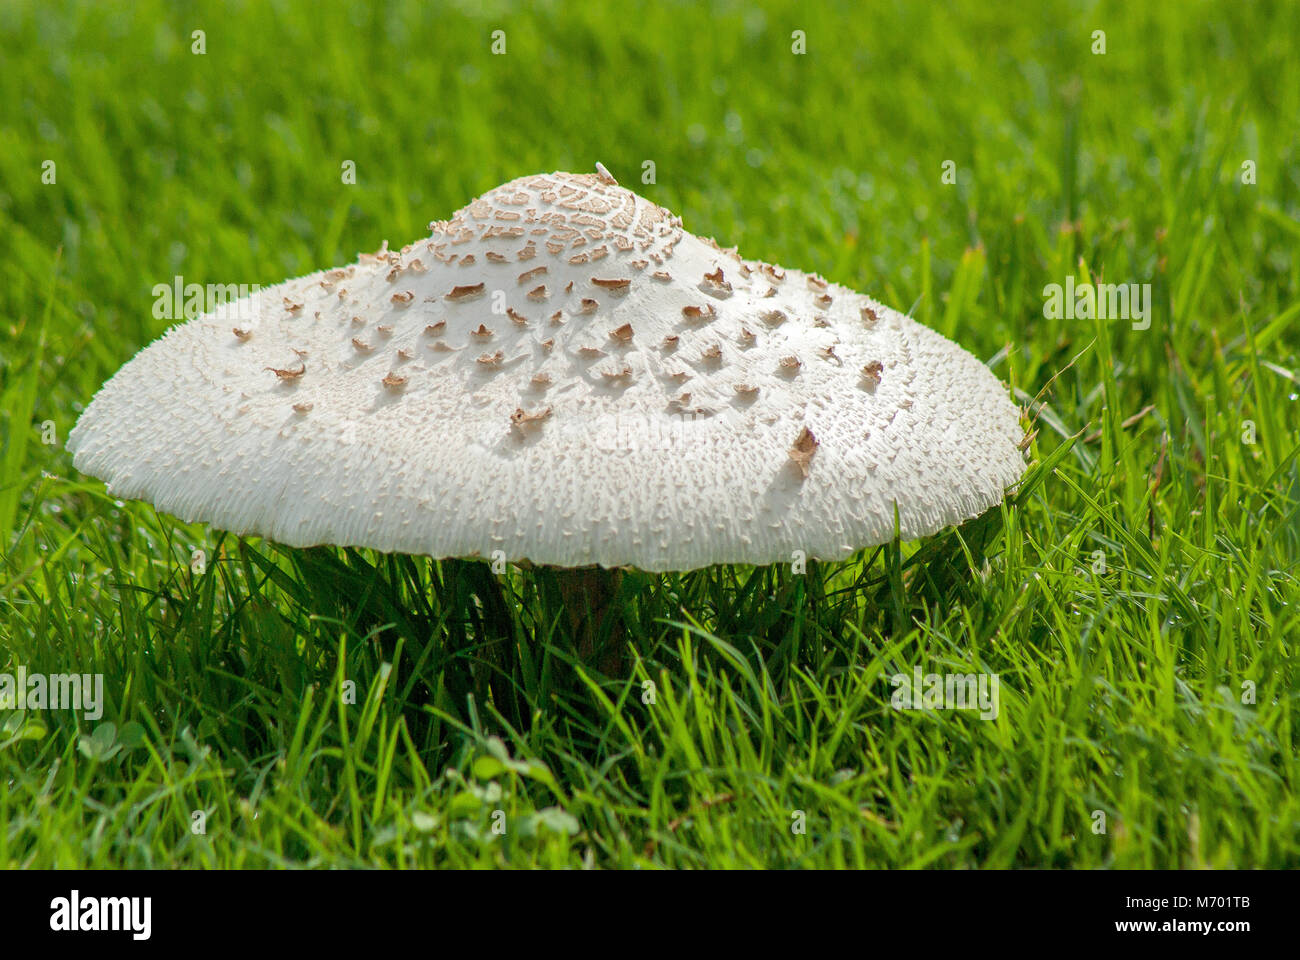 Sideview of large mushroom on green  grassy lawn Stock Photo